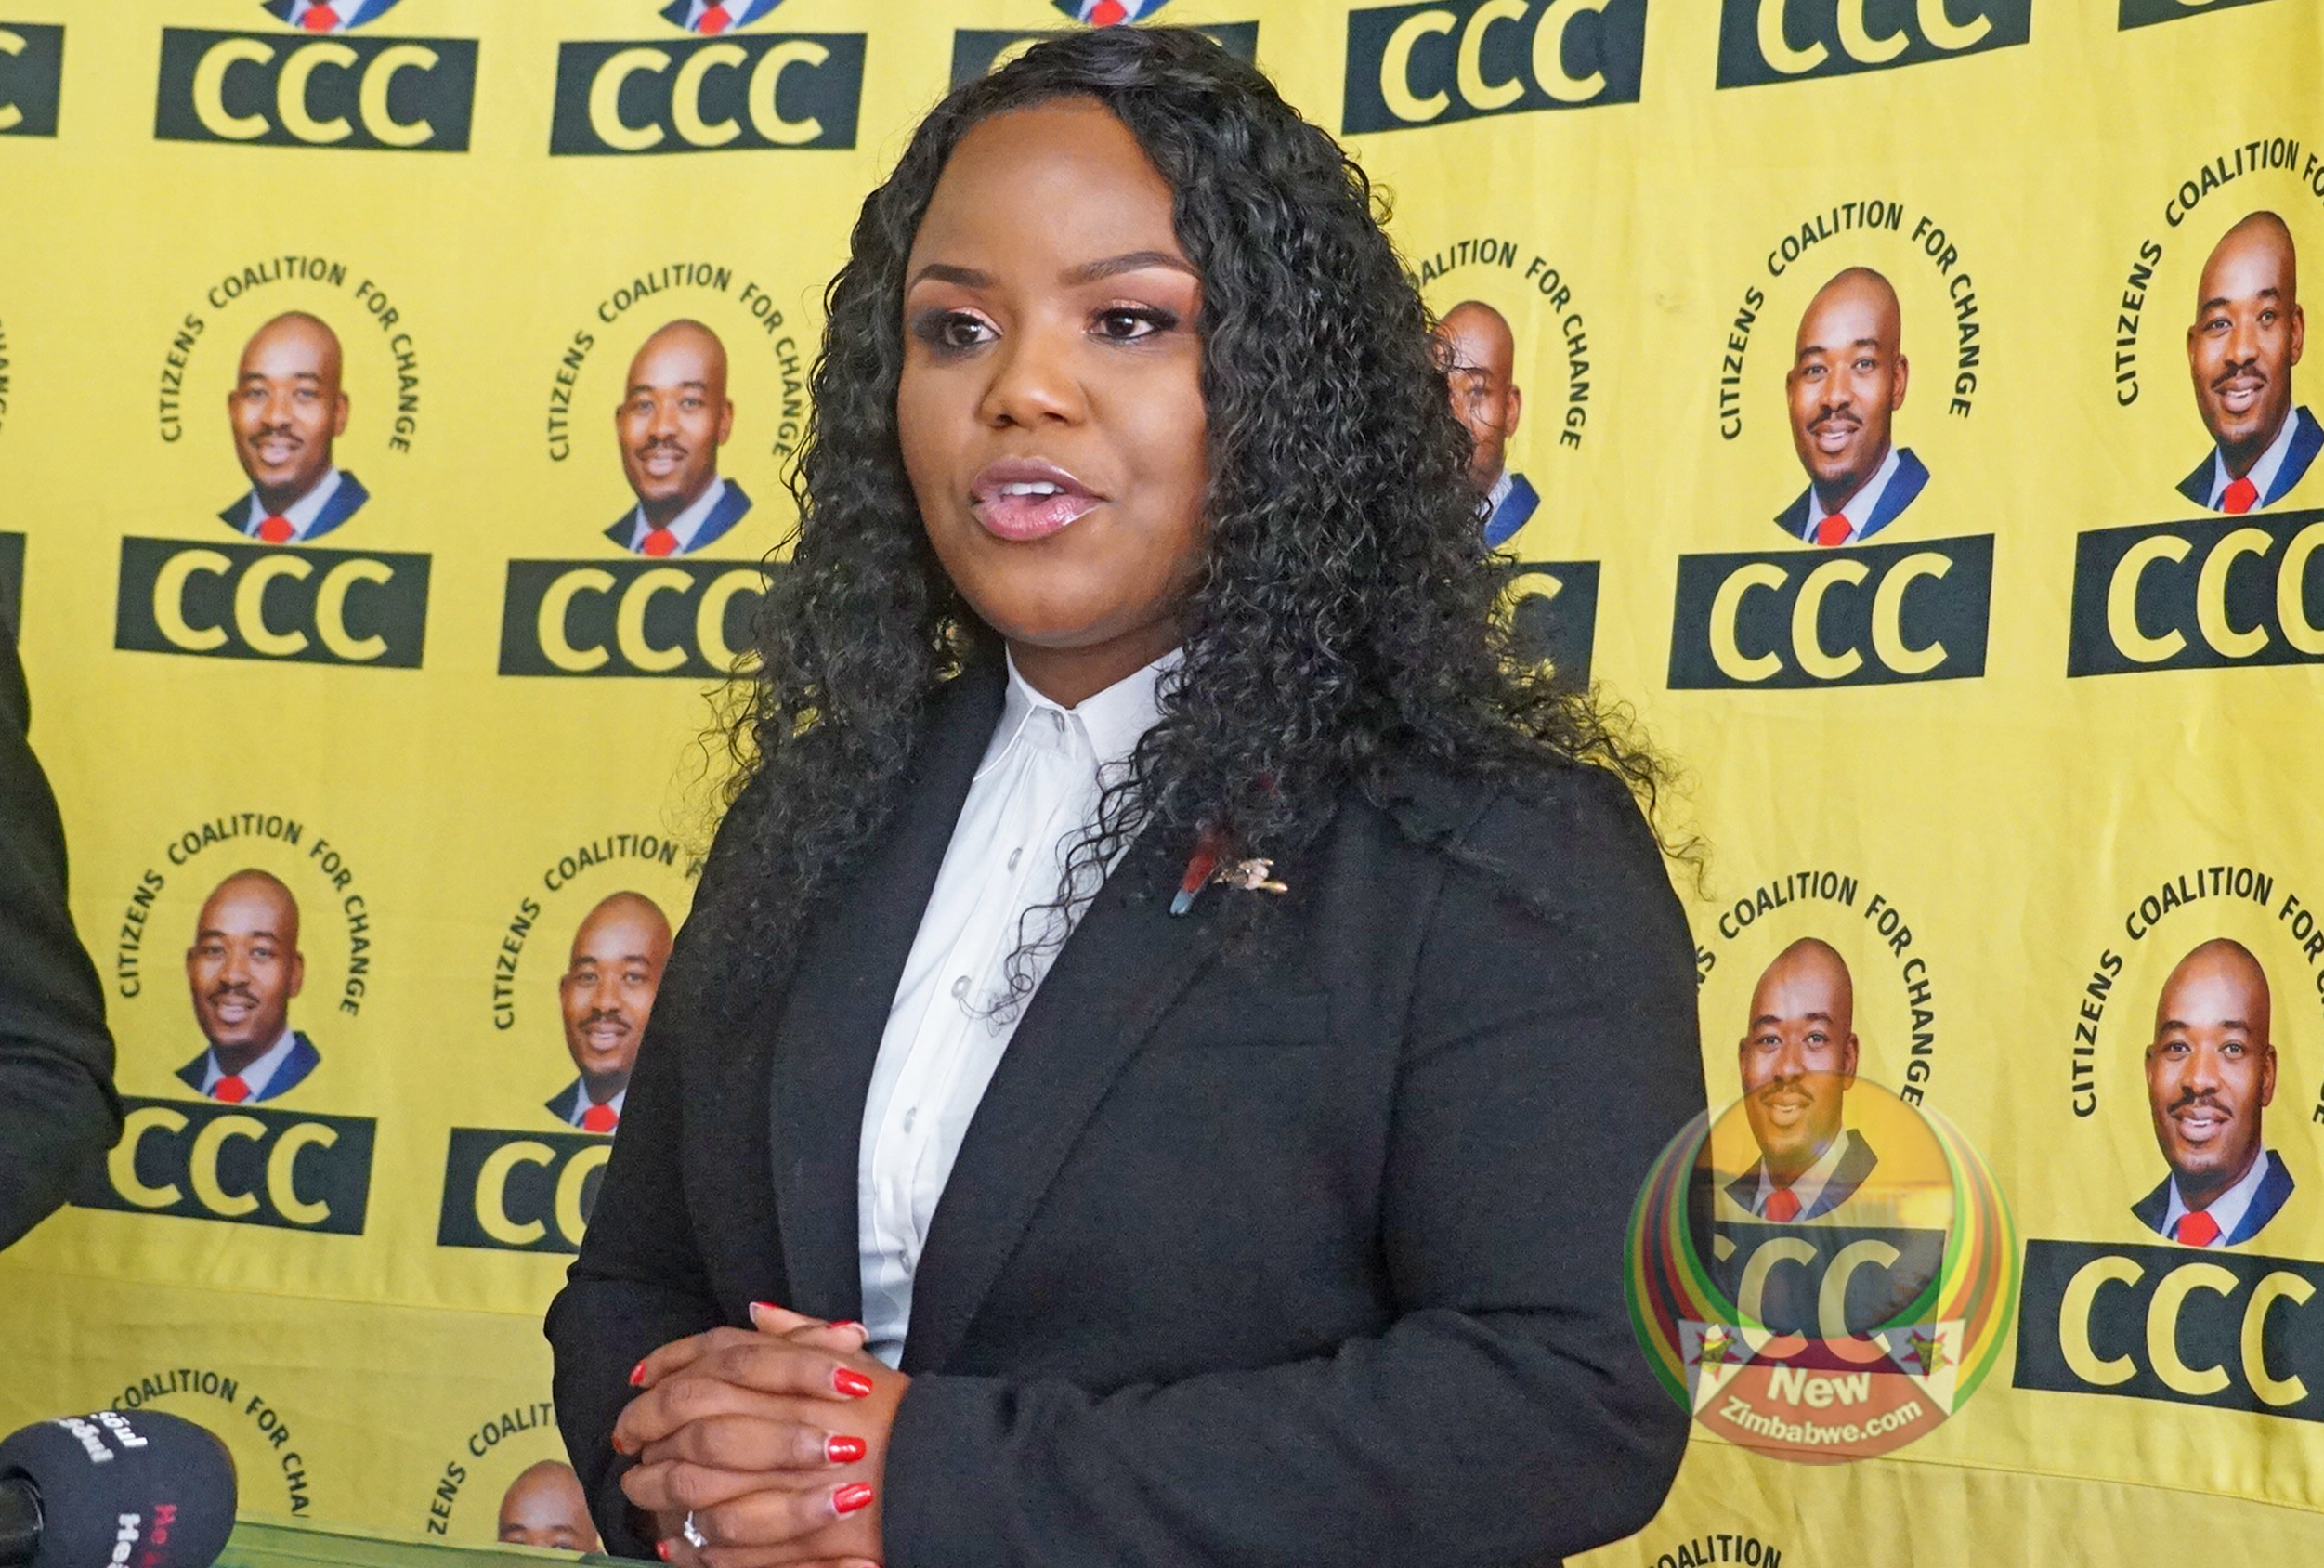 CCC Member of Parliament in Big trouble